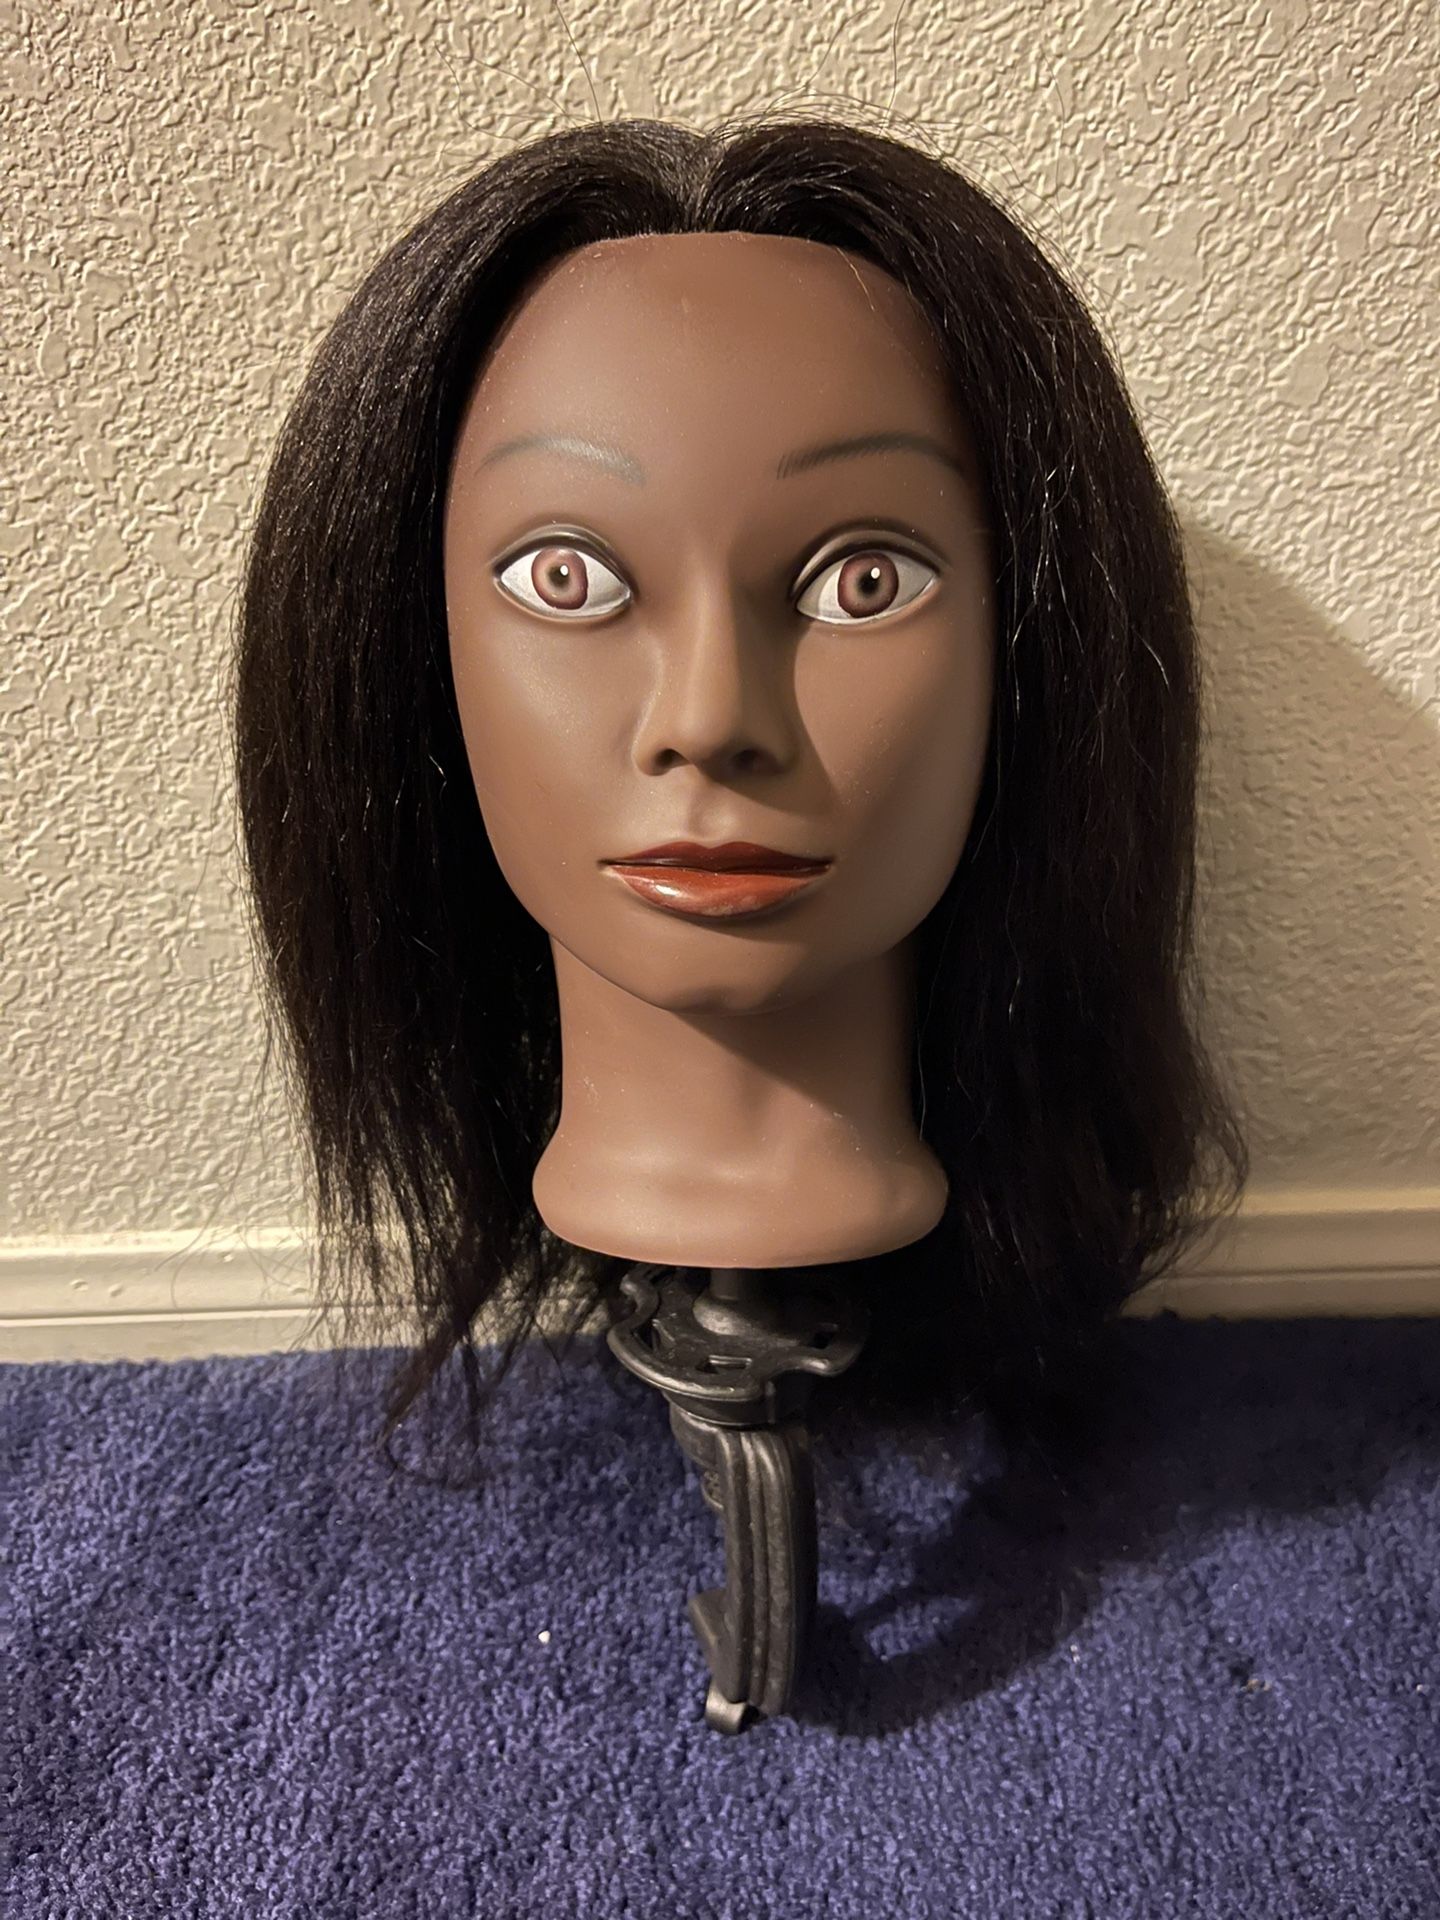 Mannequin Head With Hair For Beauty School